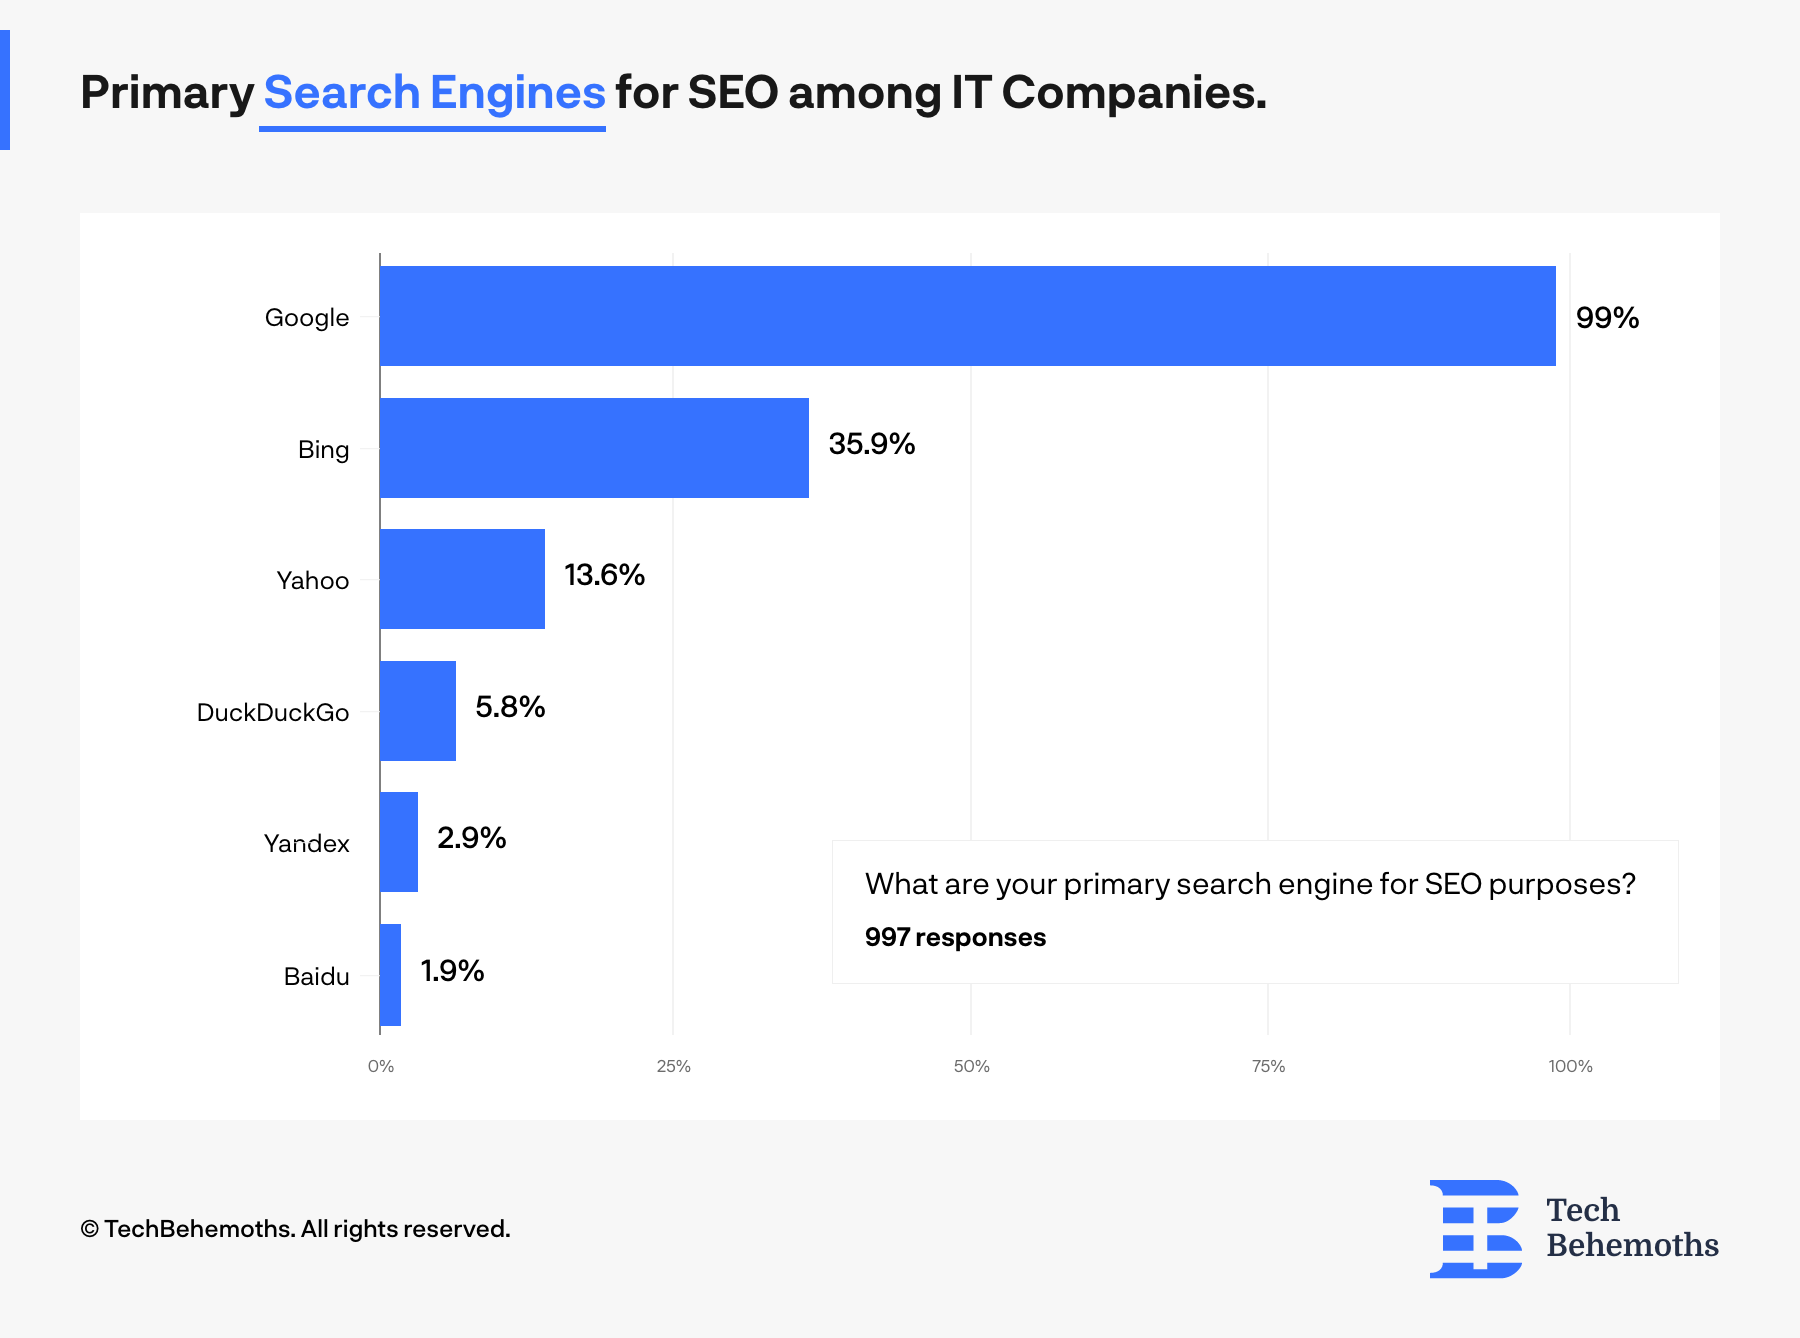 99% of all survey respondents use Google as their primary search engine for SEO